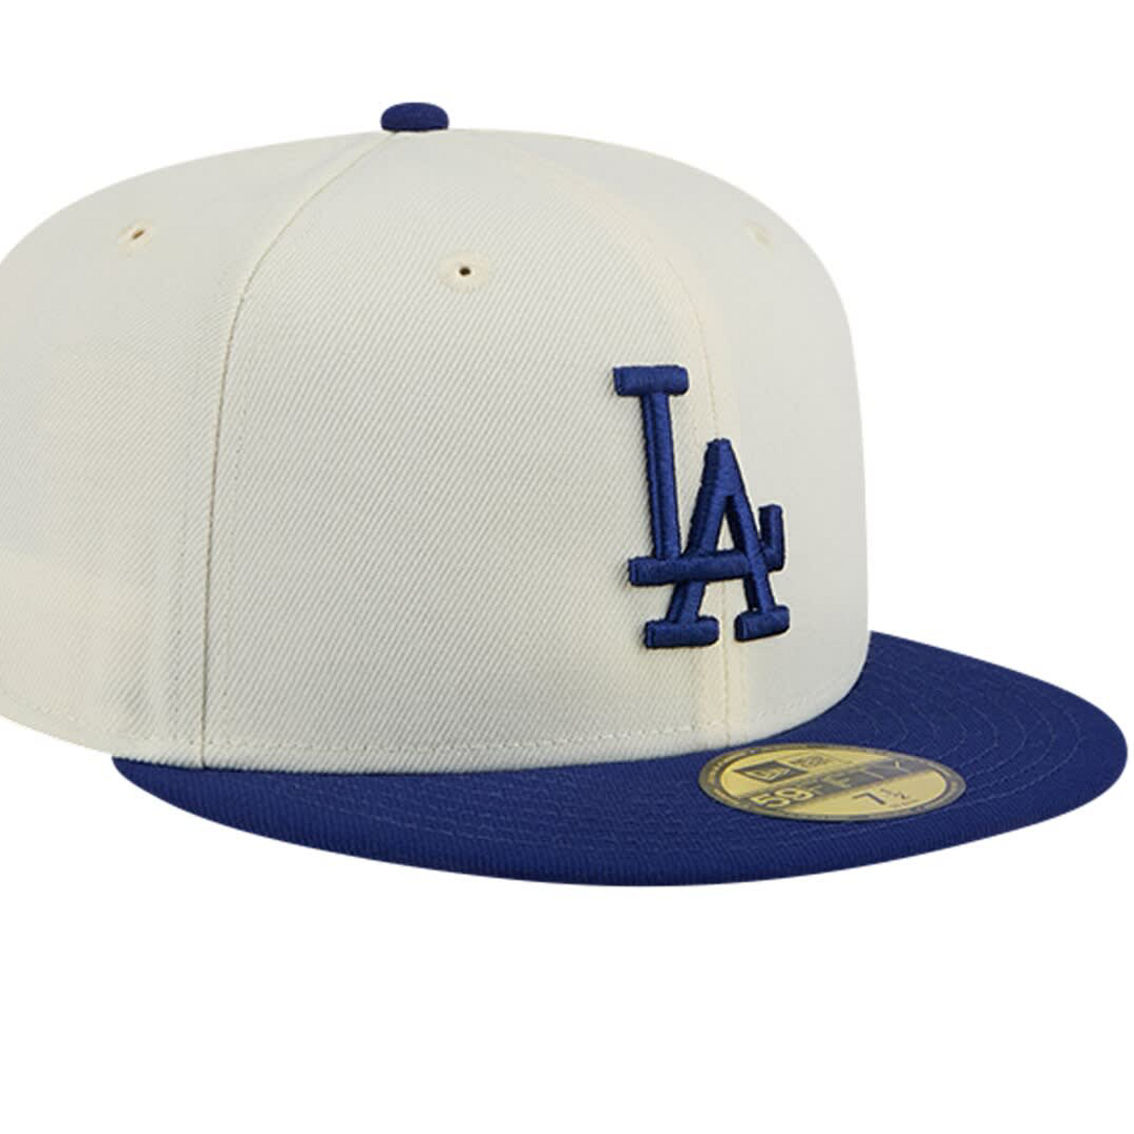 New Era Men's Cream Los Angeles Dodgers Evergreen Chrome 59FIFTY Fitted Hat - Image 4 of 4